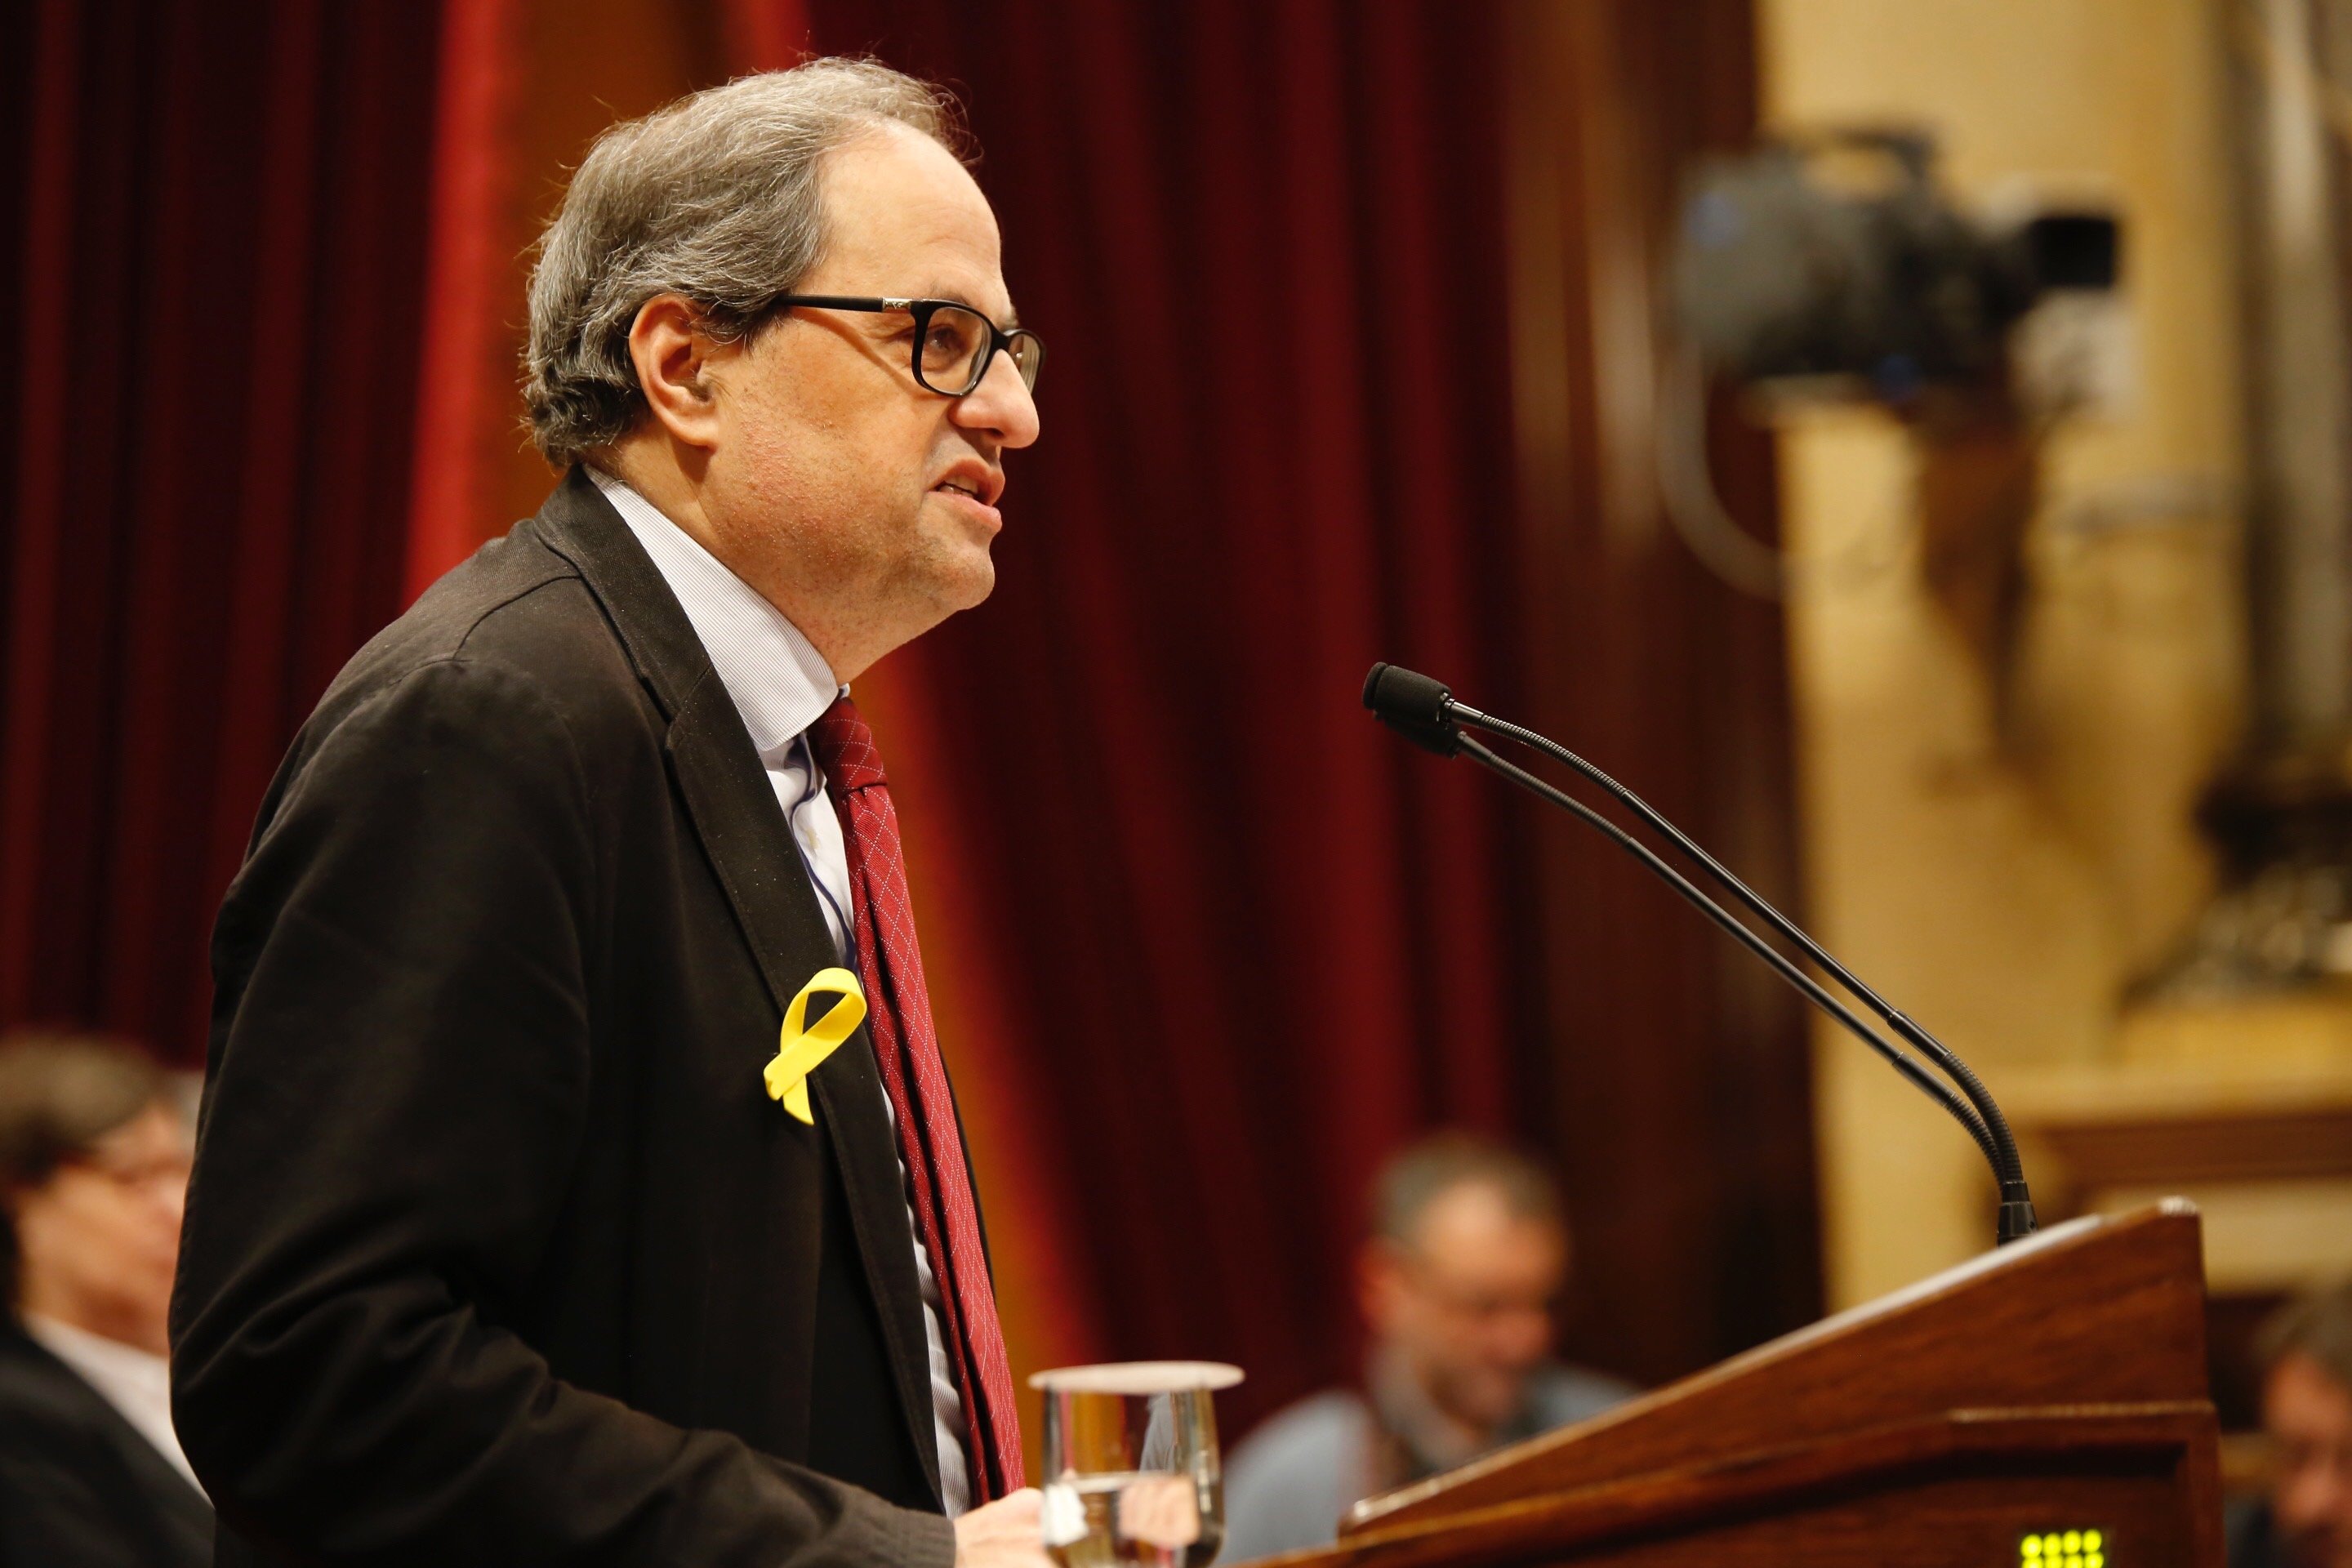 Quim Torra to be 131st president of Catalonia